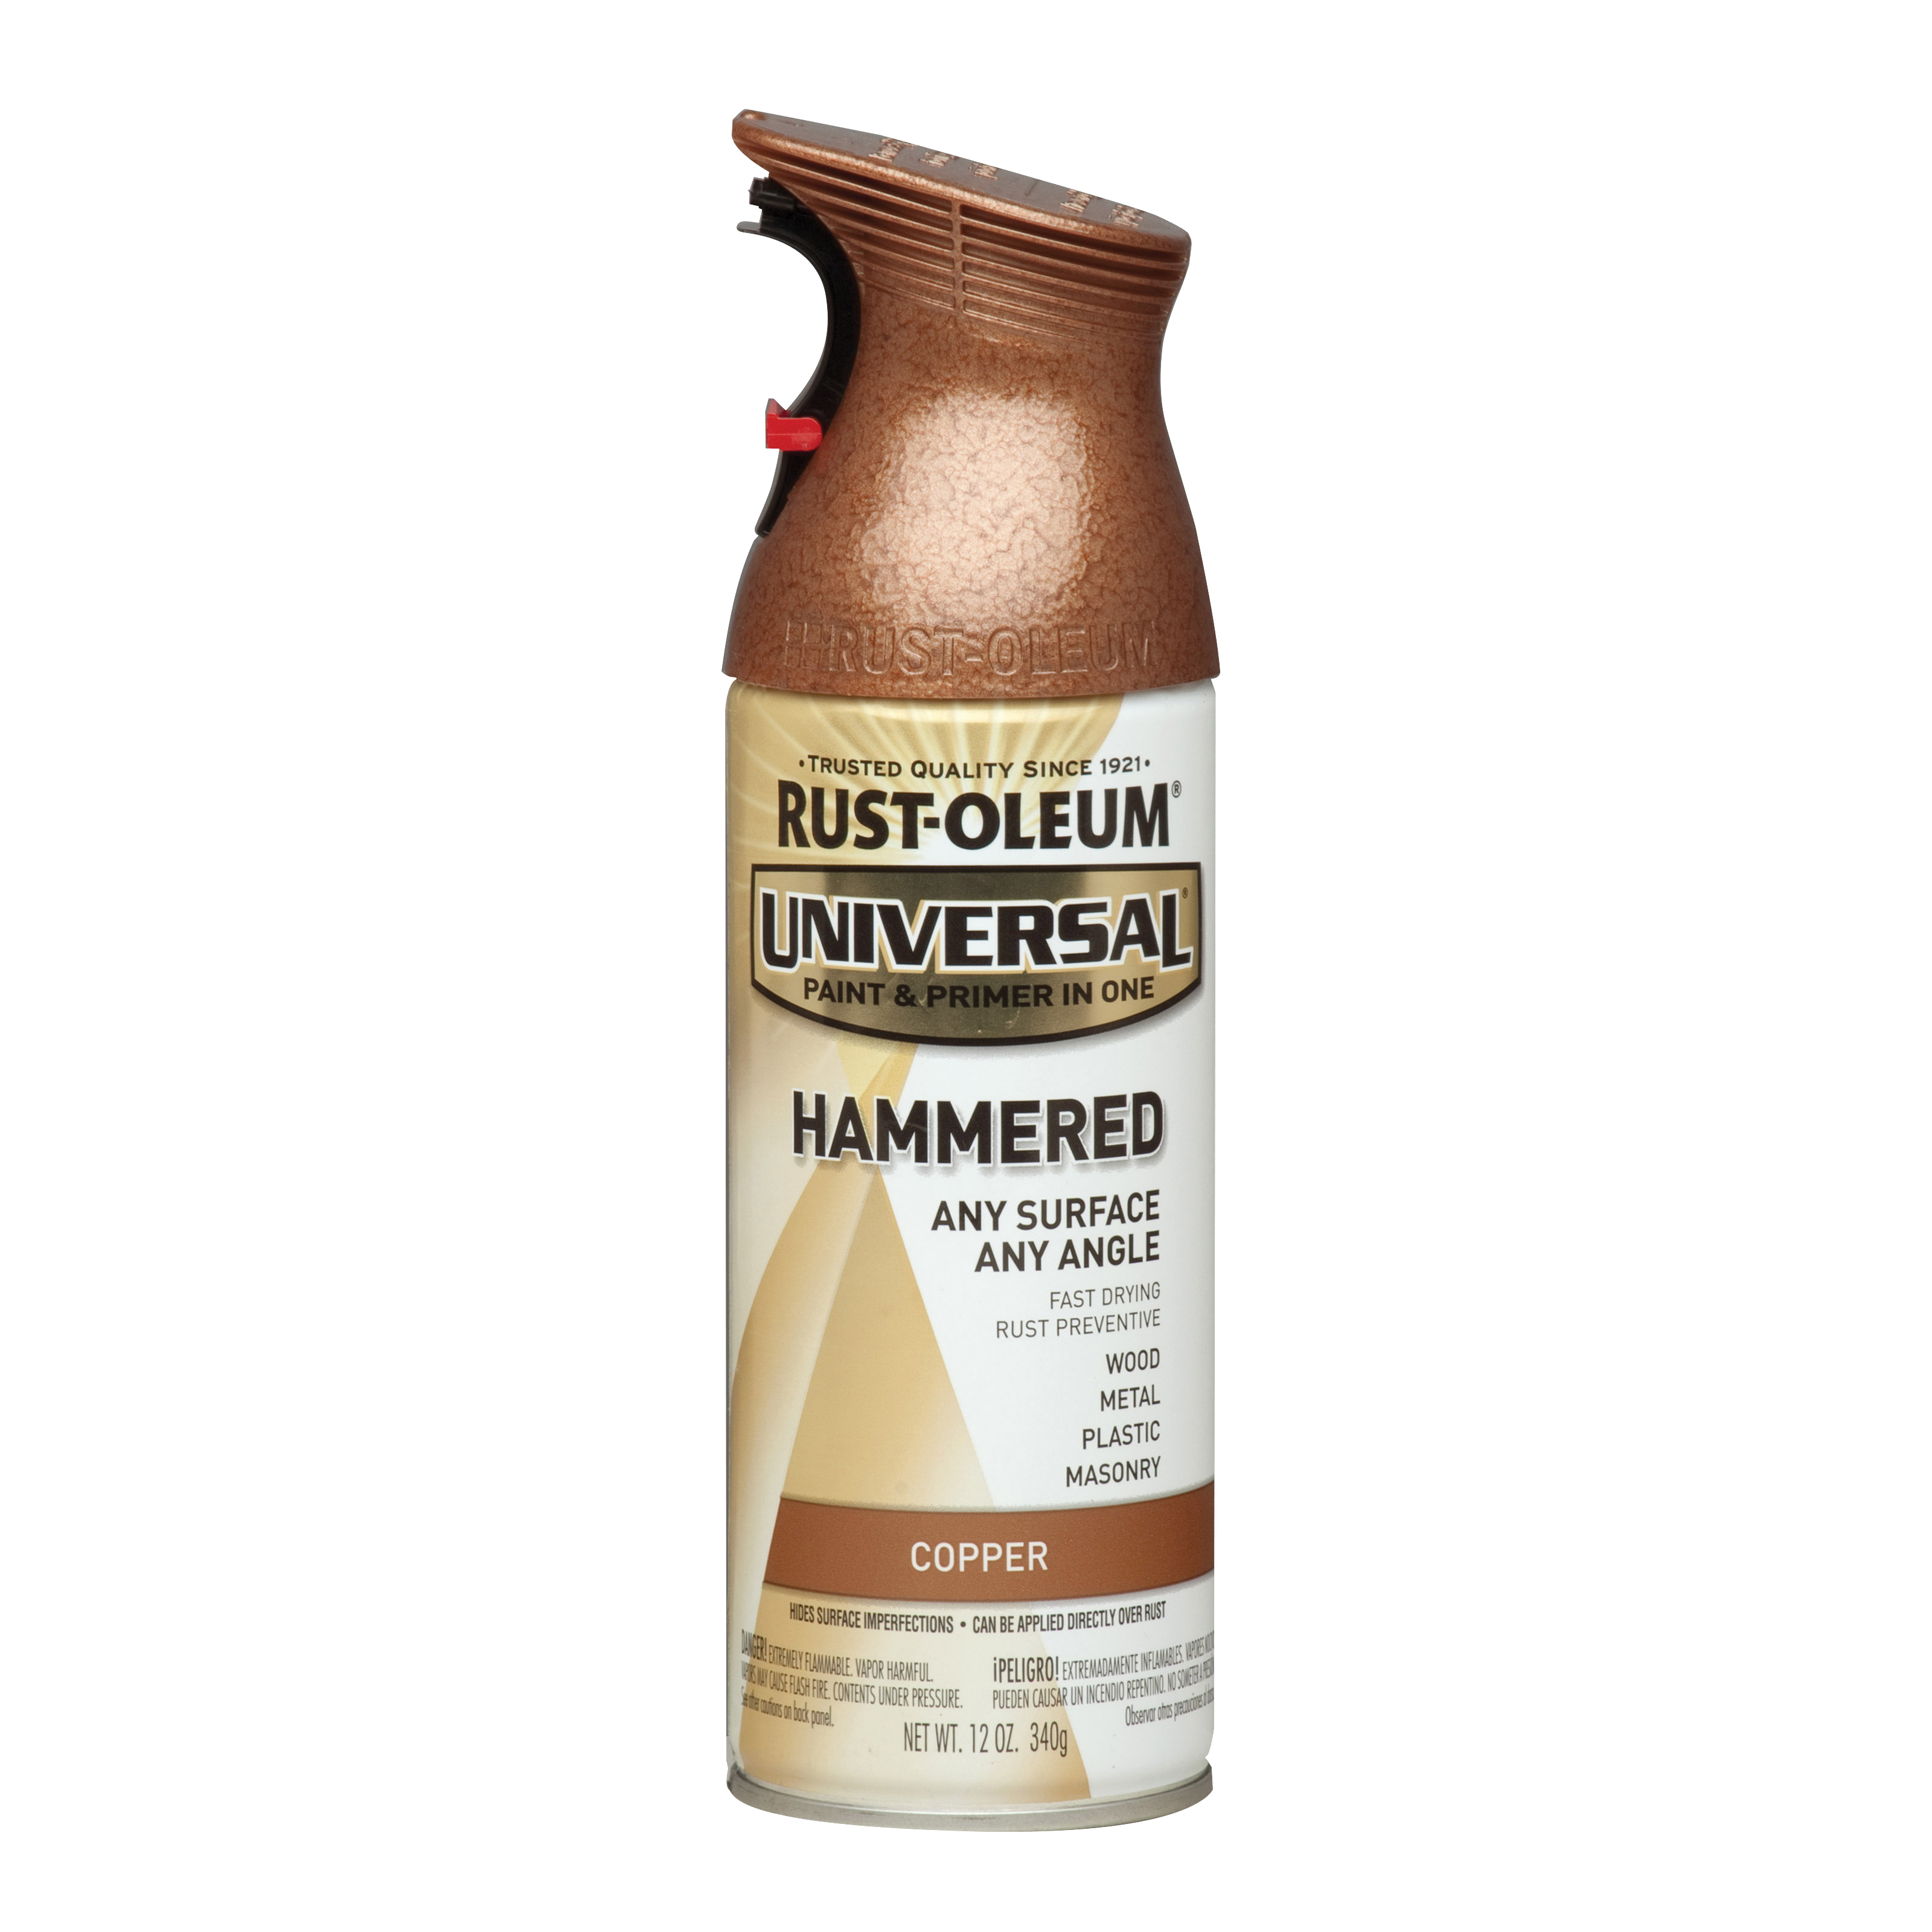 247567 Hammered Spray Paint, Hammered, Copper, 12 oz, Can